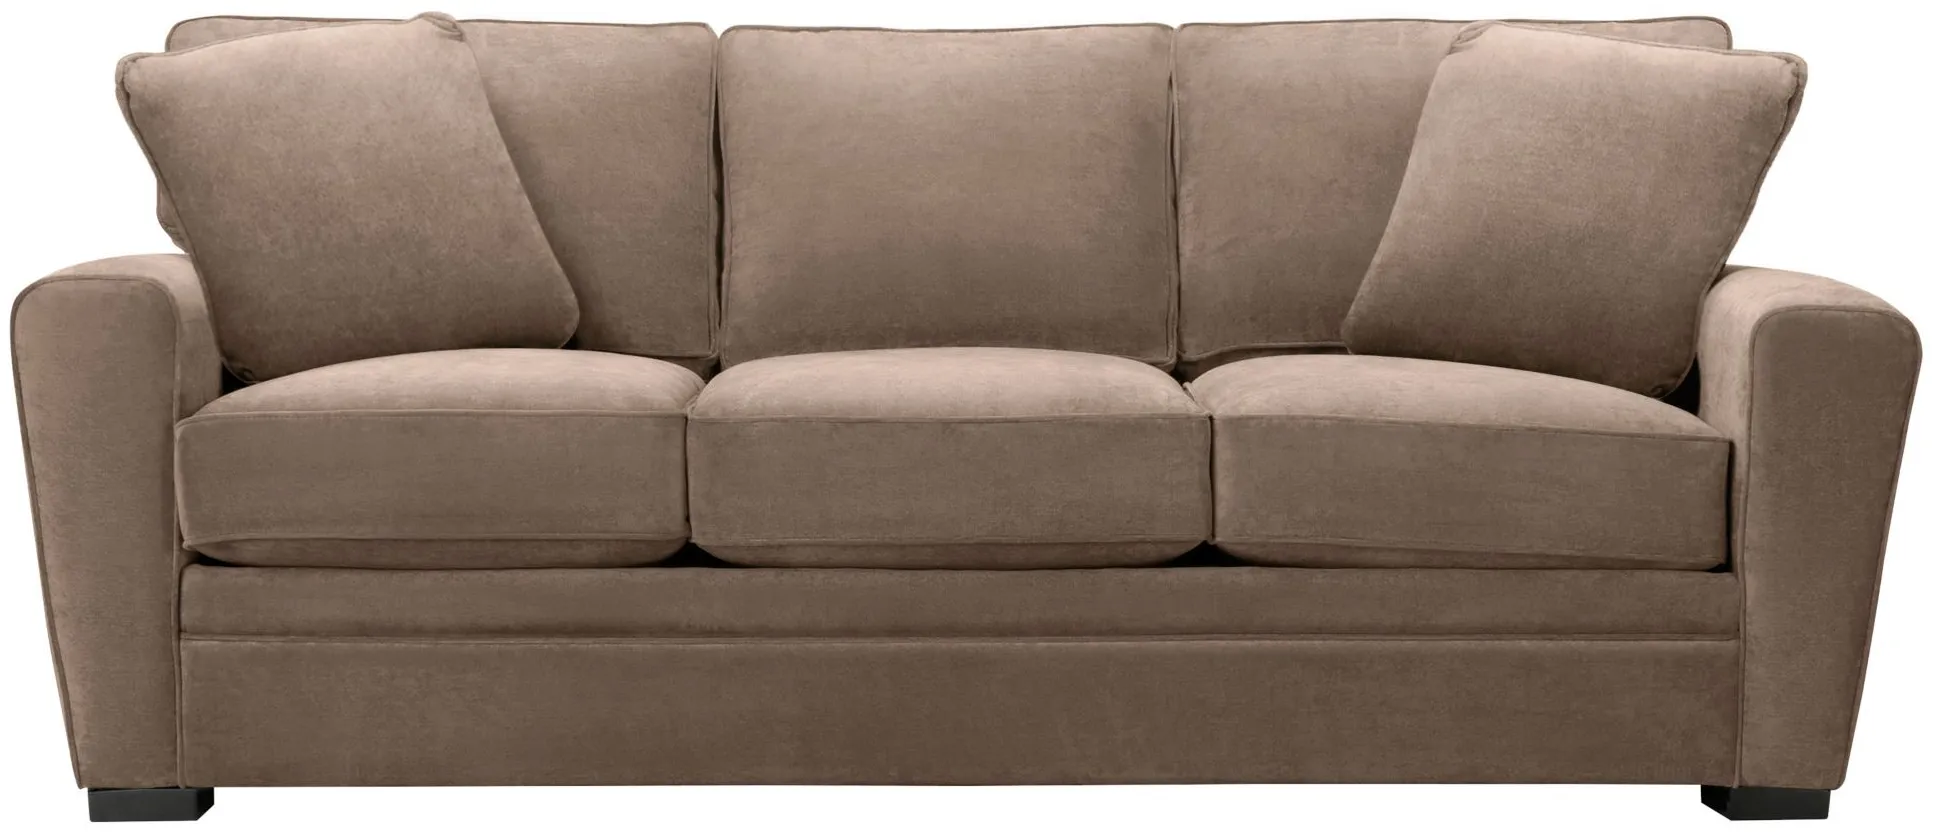 Artemis II Queen Sleeper Sofa in Gypsy Taupe by Jonathan Louis